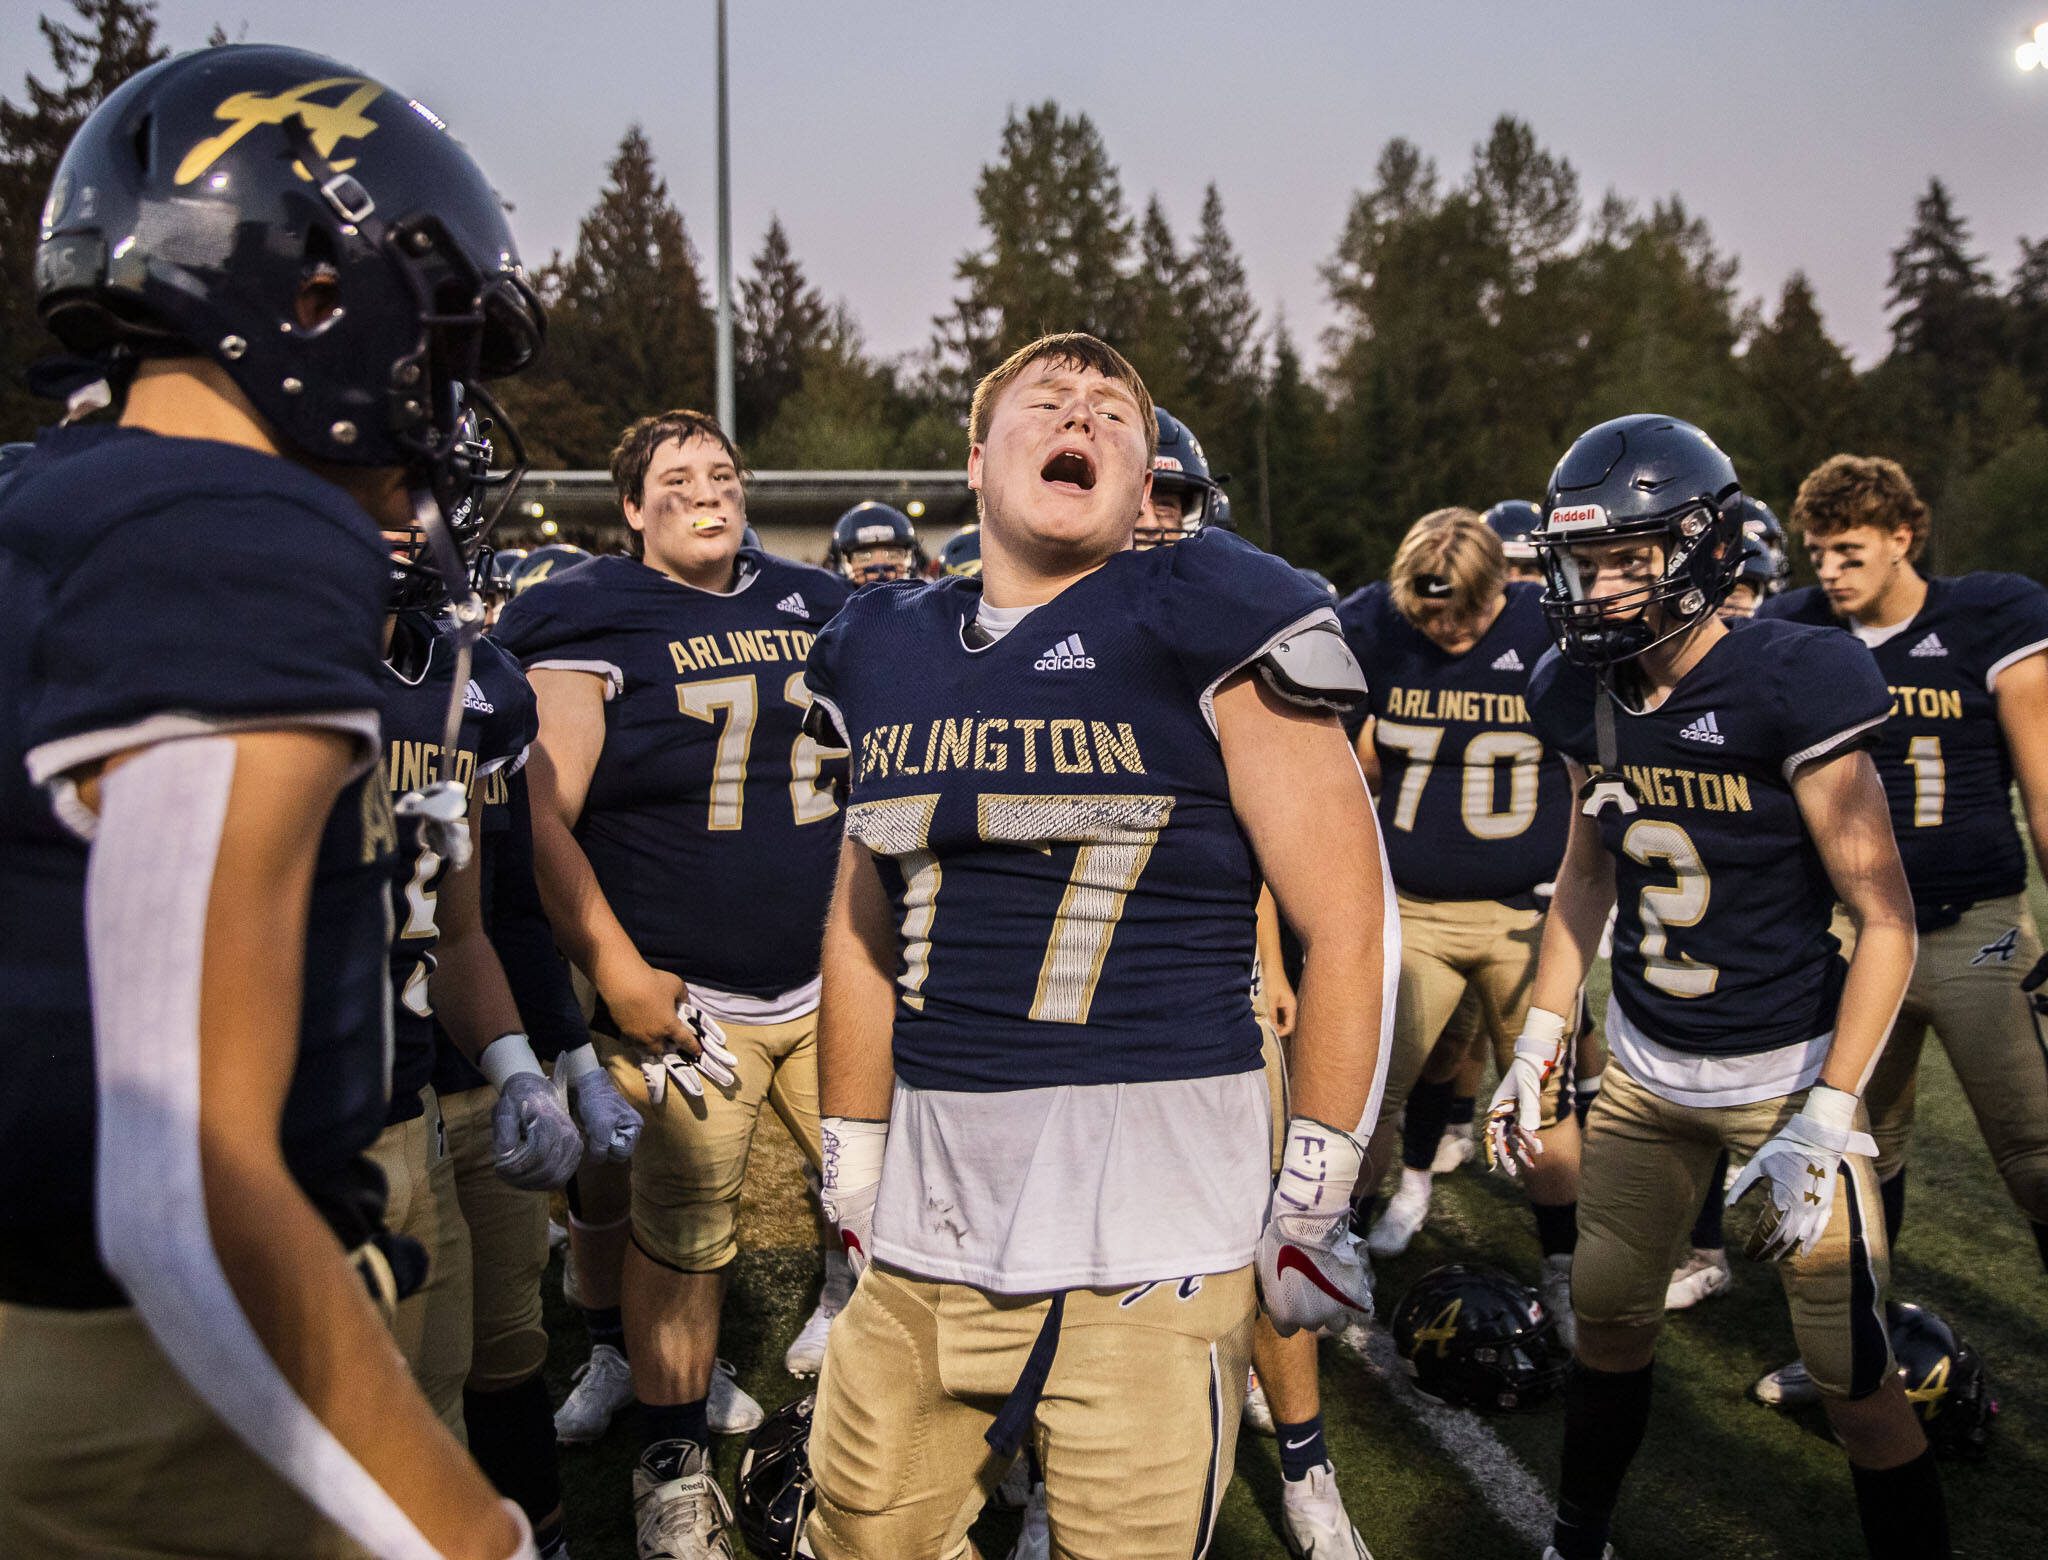 Arlington’s Wyatt Tilton gets his team pumped up before the Stilly Cup rivalry game against Stanwood on Sept. 30, 2022, in Arlington. (Olivia Vanni / The Herald)